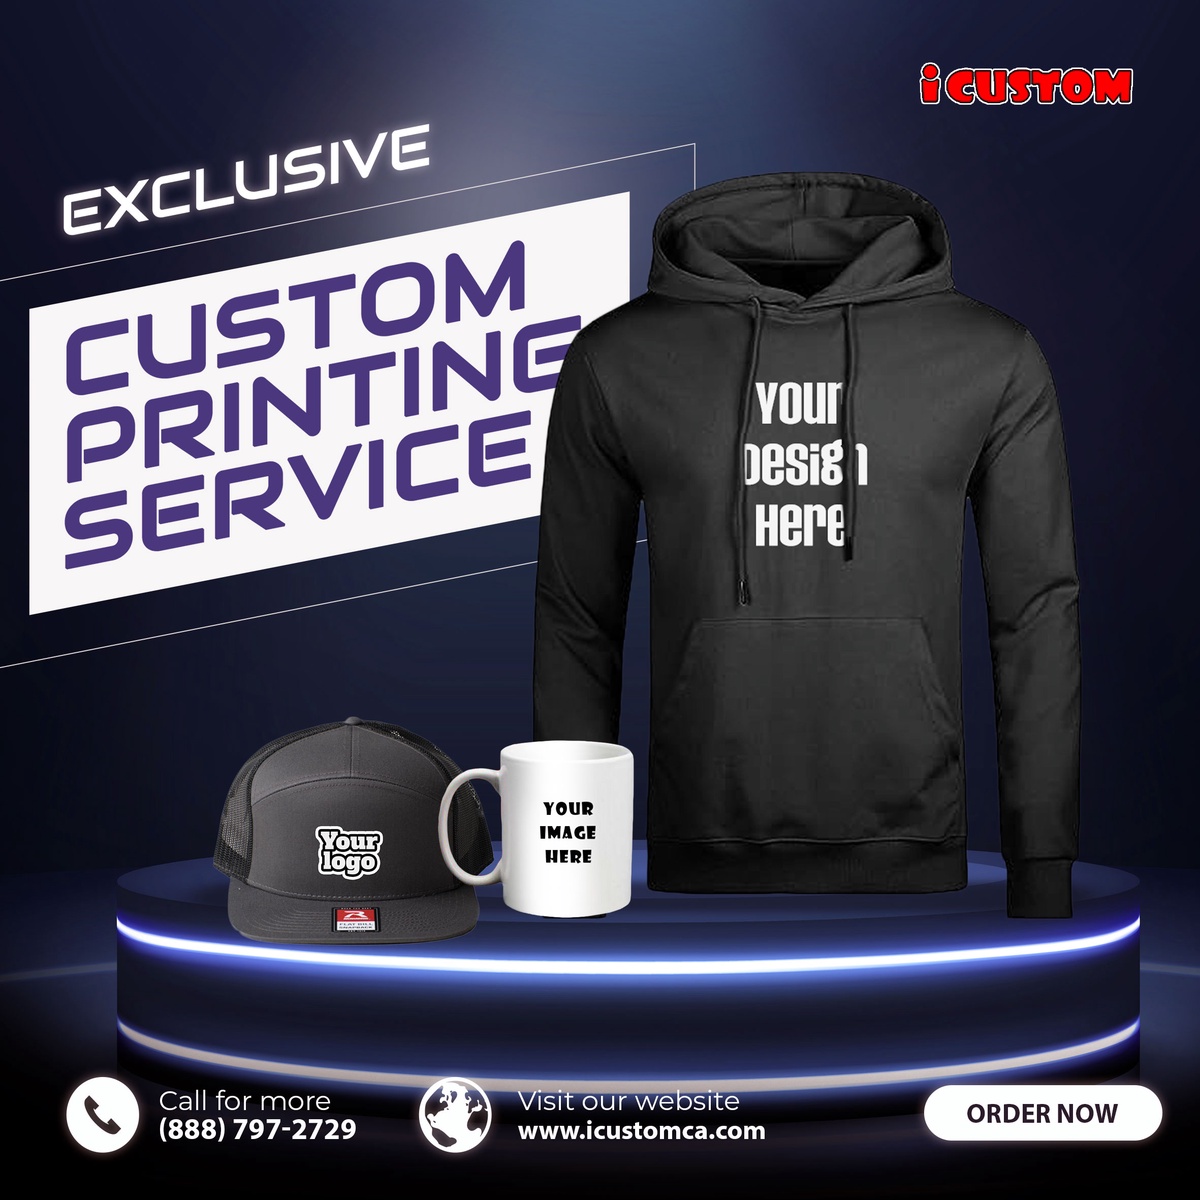 #custom t-shirts for events #customized fashion #affordable custom t-shirts #custom promotional t-shirts #customized hoodies